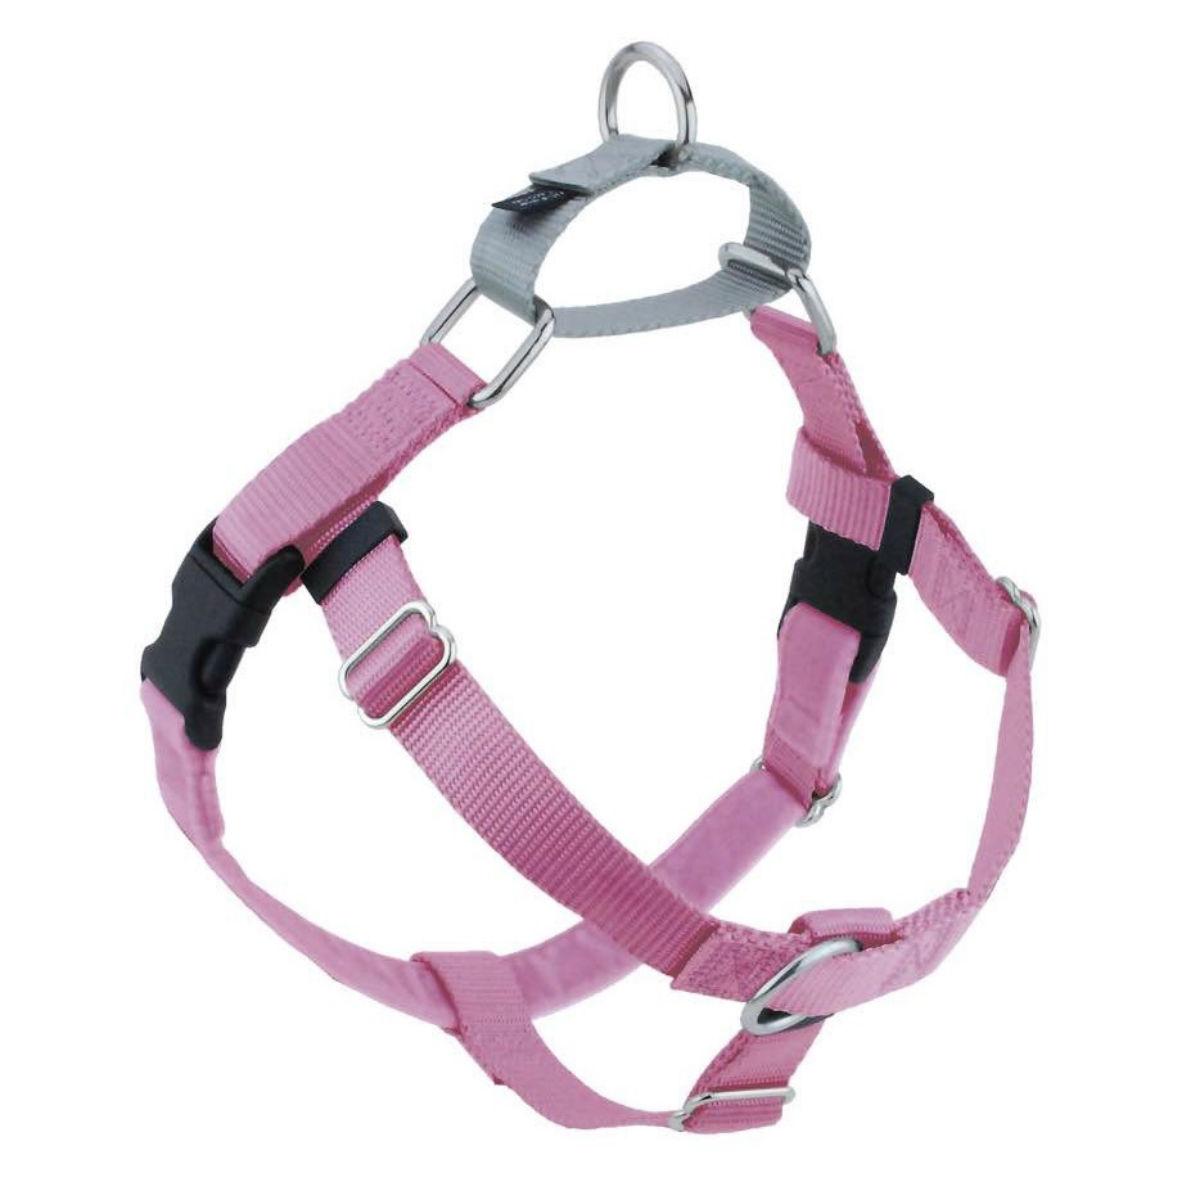 2 Hounds Design No-Pull Dog Harness Deluxe Training Package - Rose and Silver